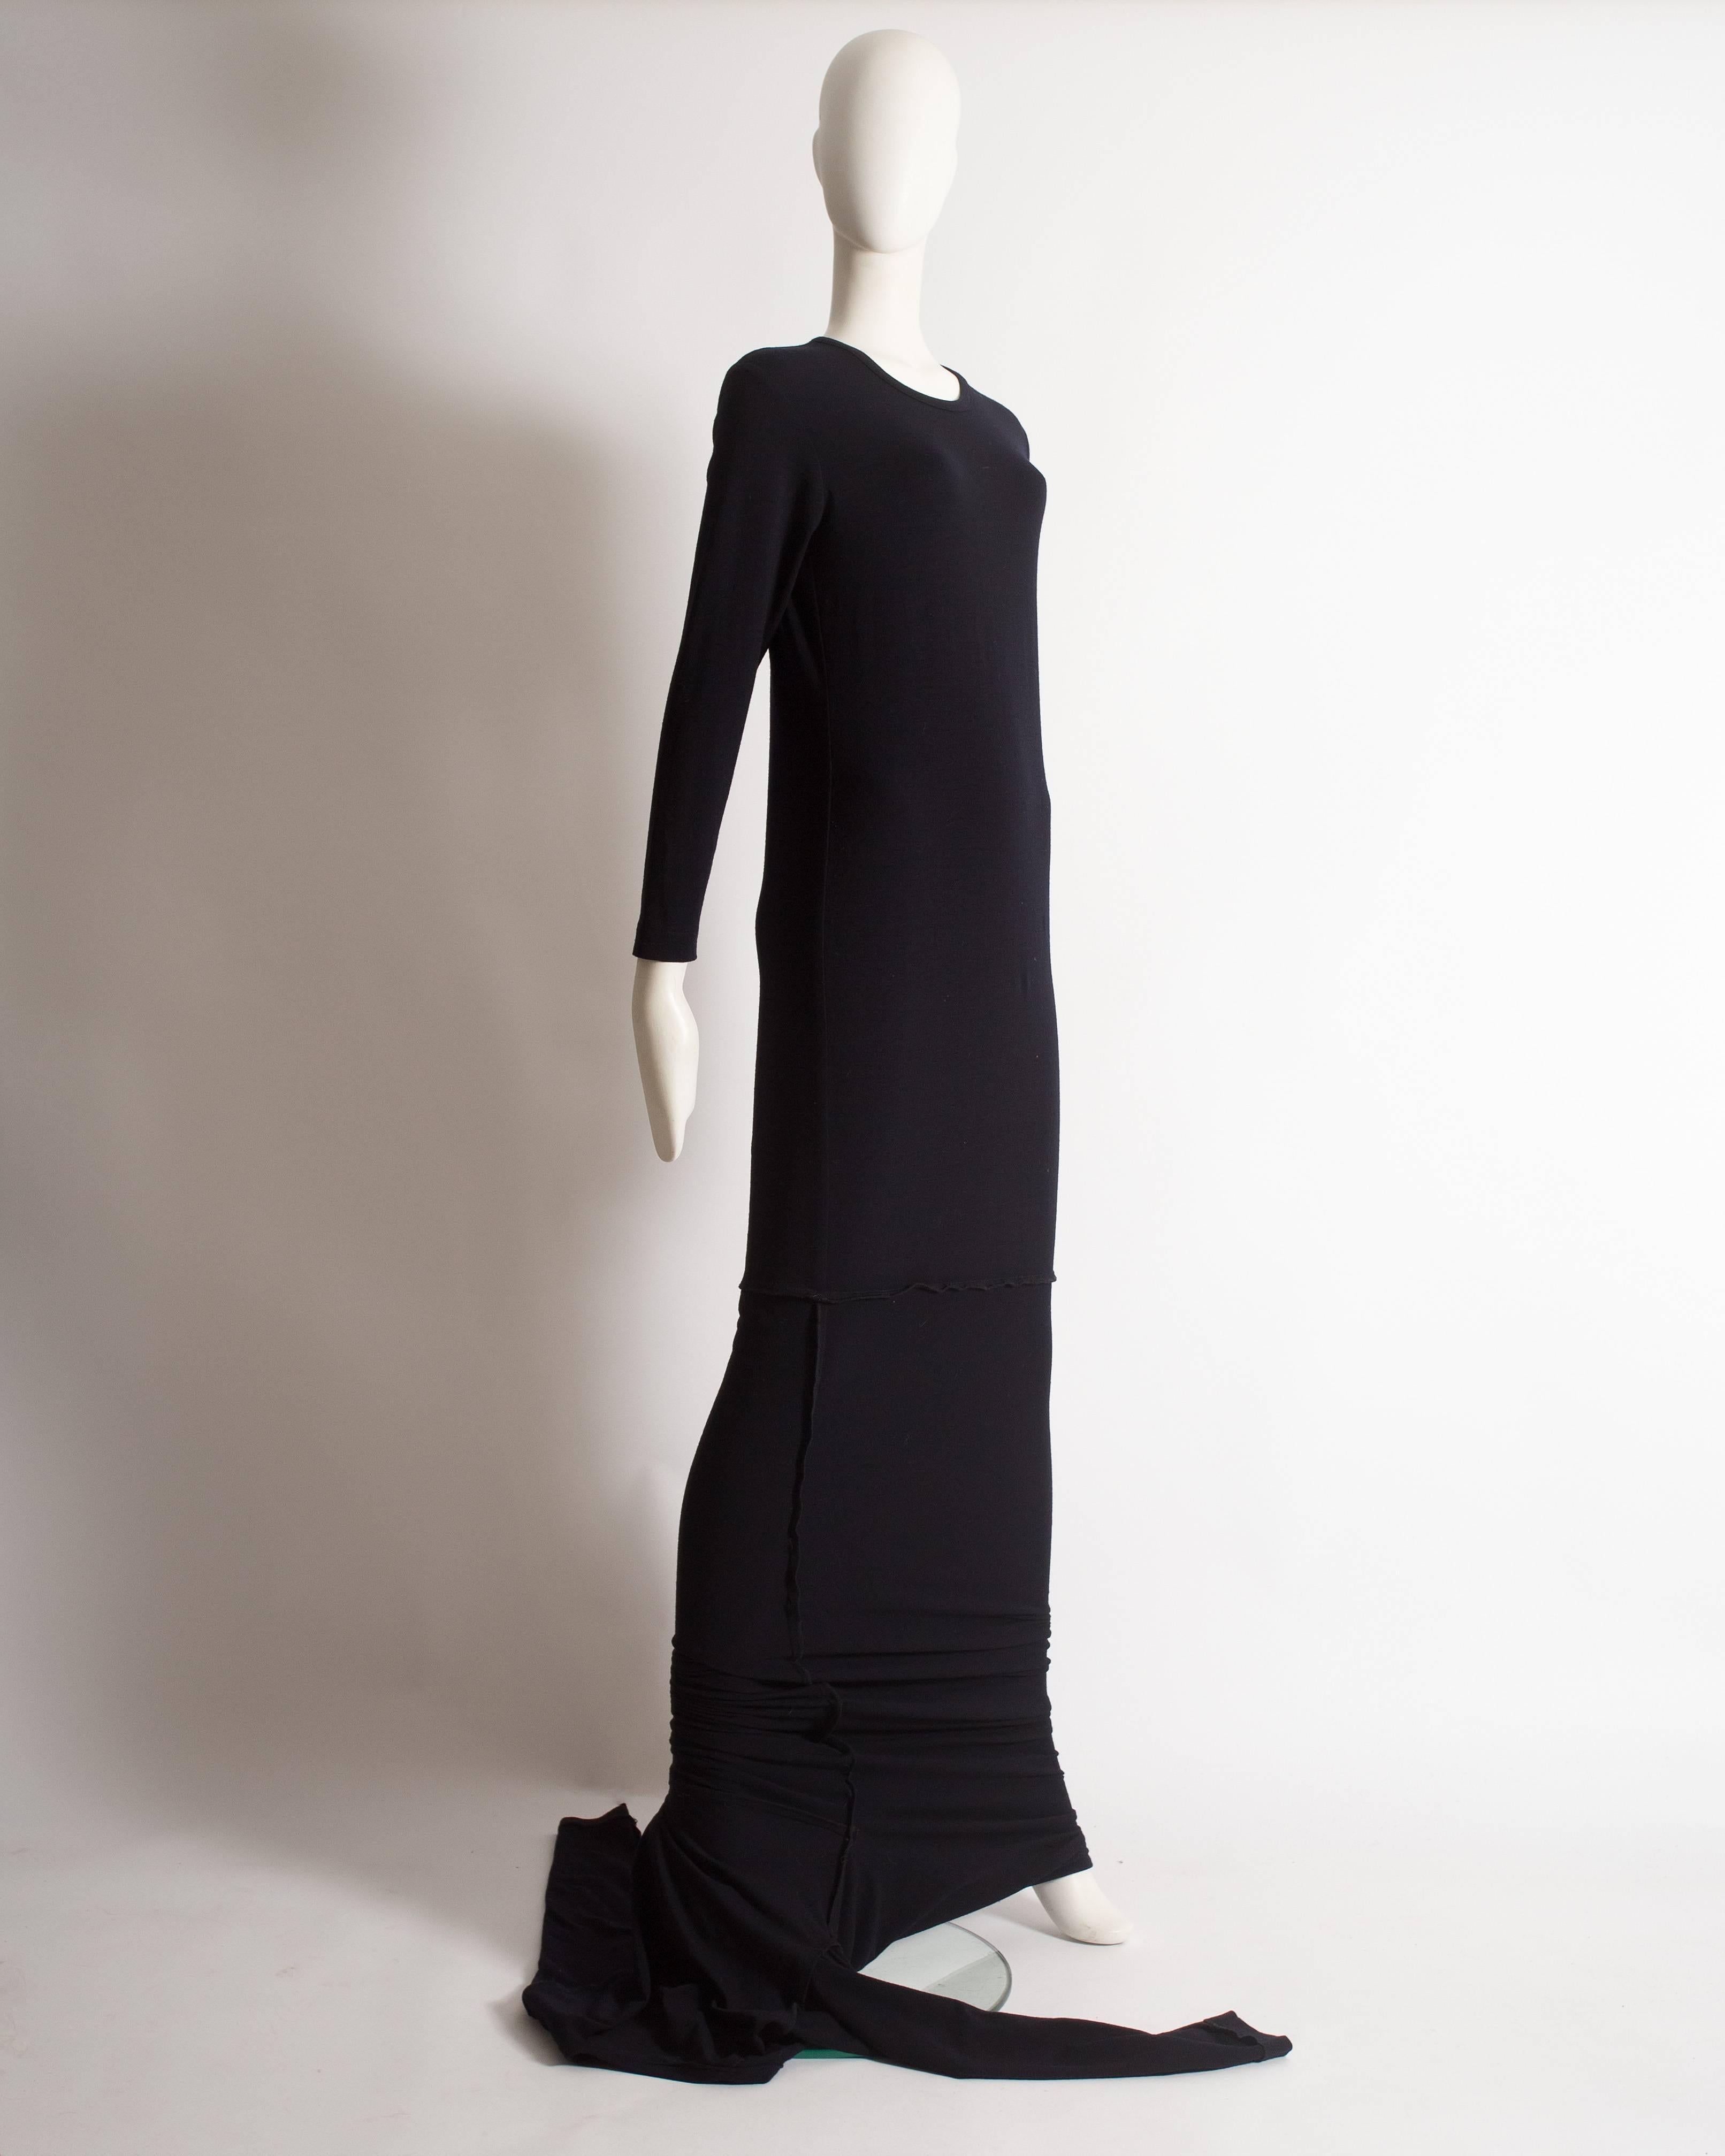 Rare Comme des Garcons extra long knitted dress constructed in black wool from the 'Punk Chic' collection, Autumn-Winter 1991. 

Medium

Excellent condition

